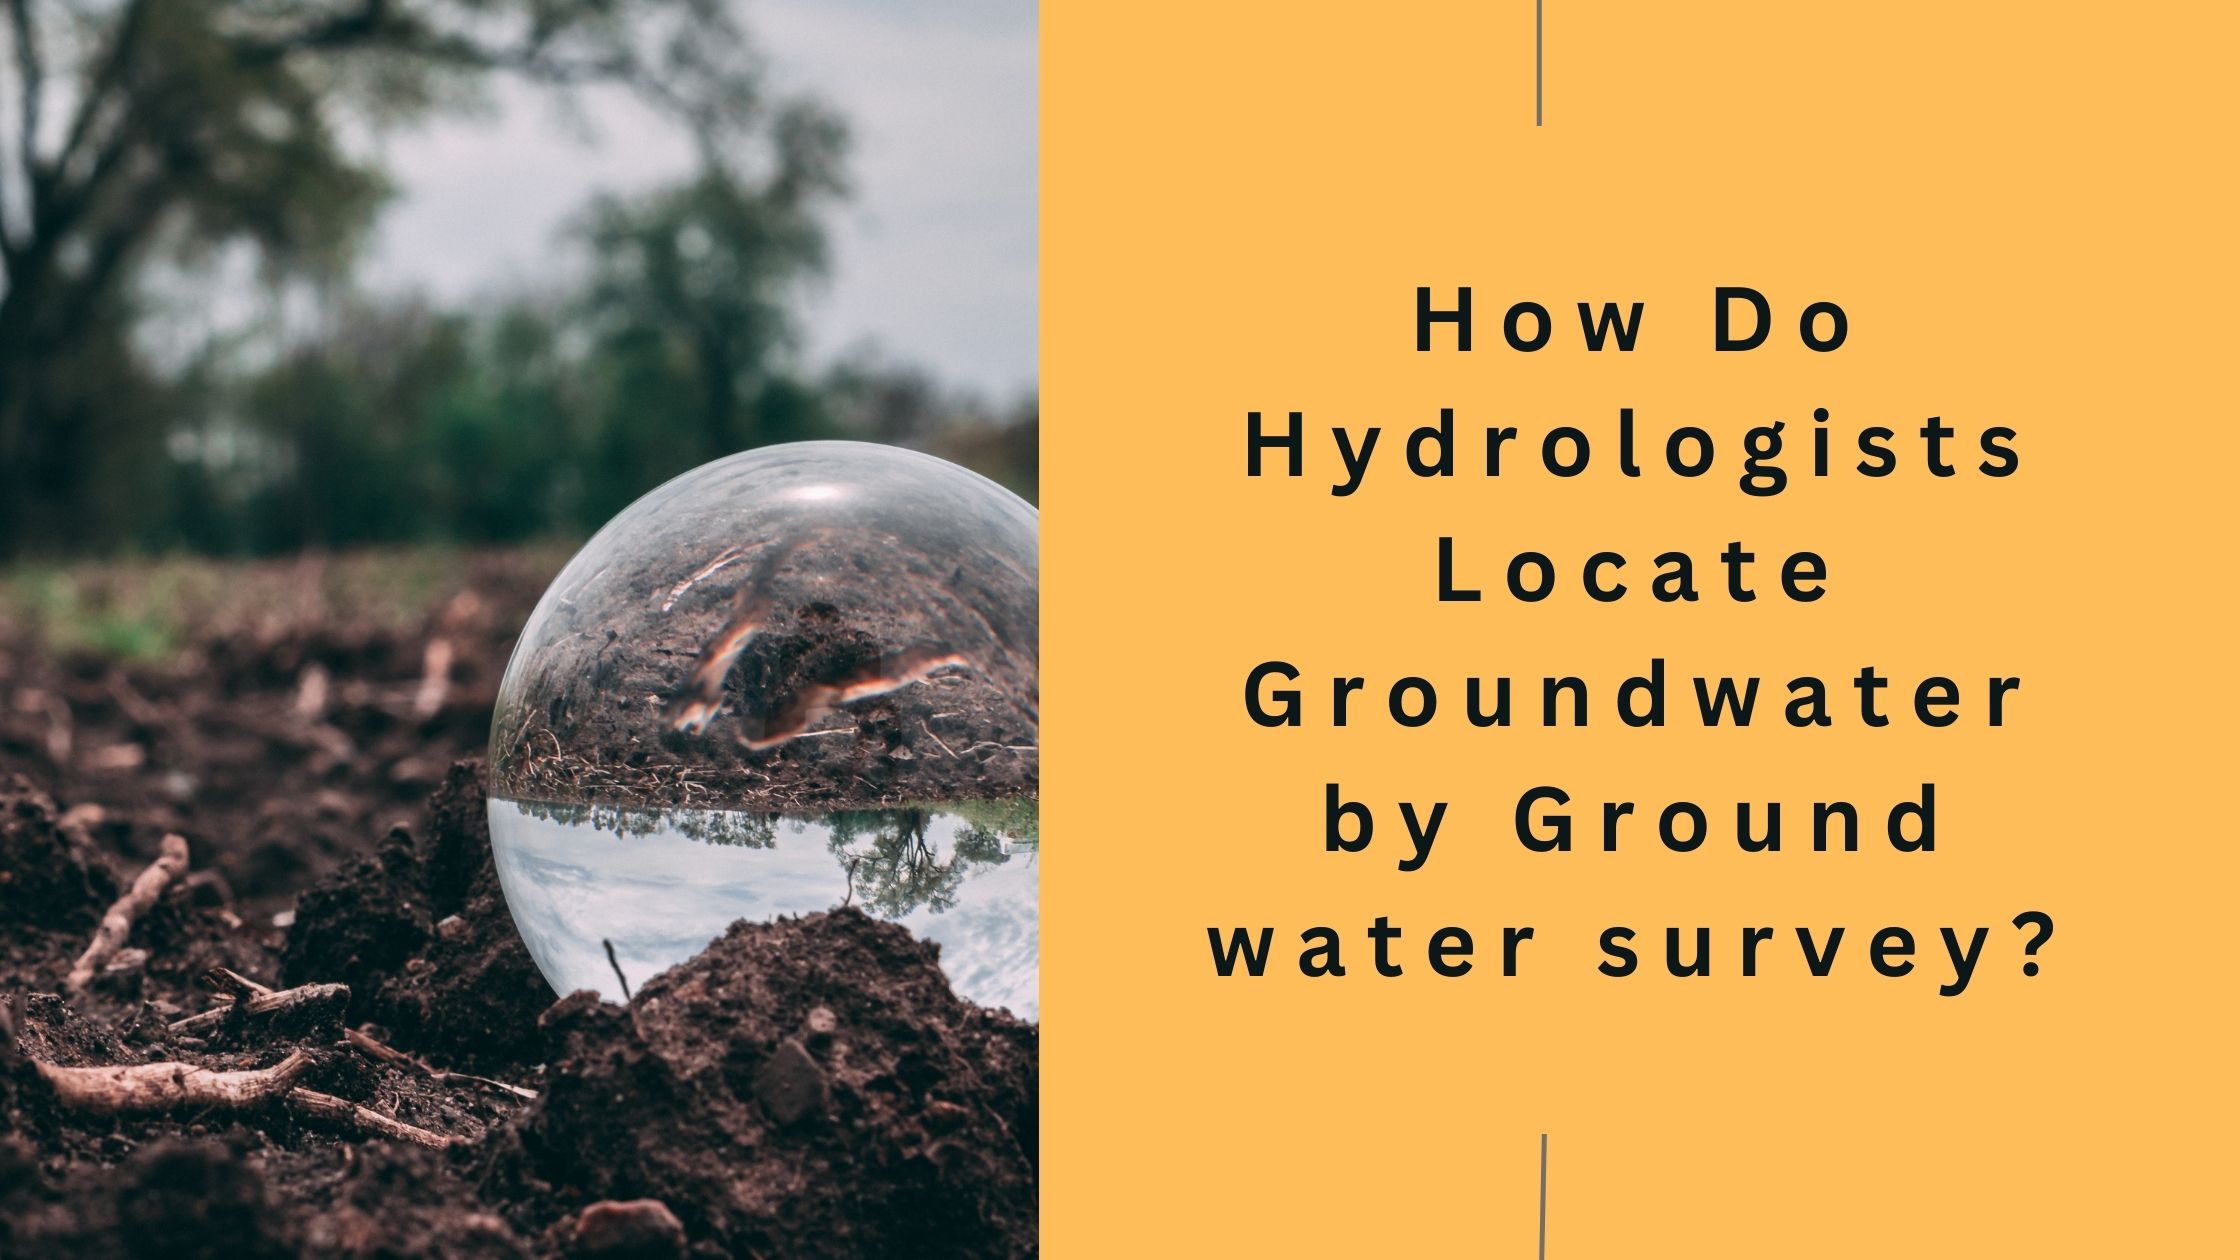 How Do Hydrologists Locate Groundwater by Ground water survey?